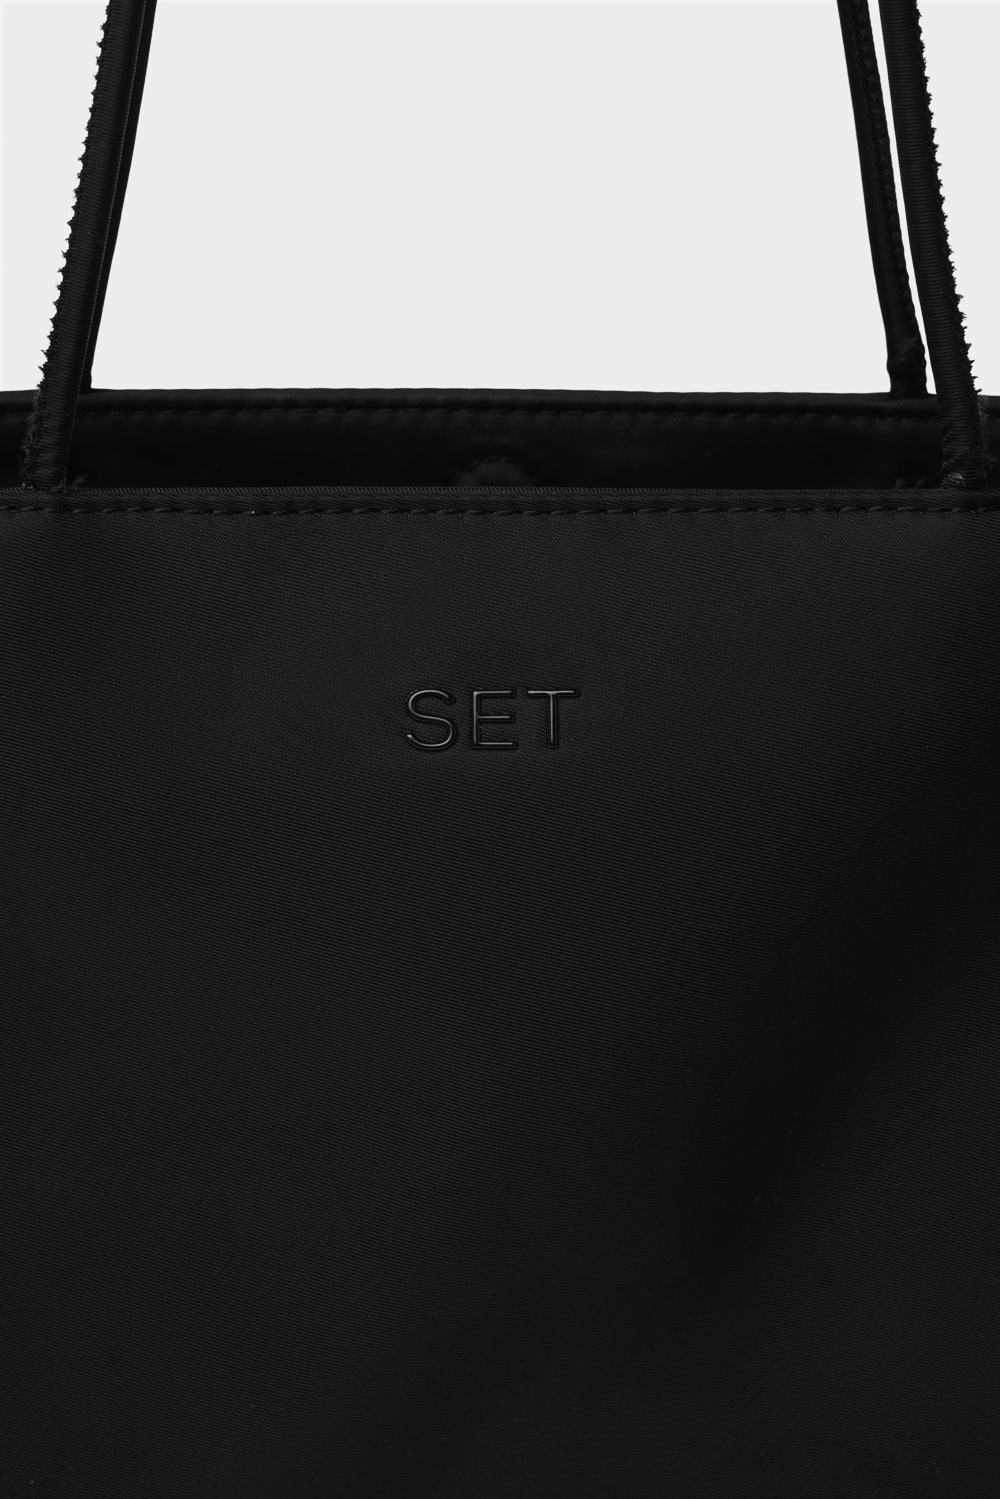 SET™ CITY TOTE IN ONYX